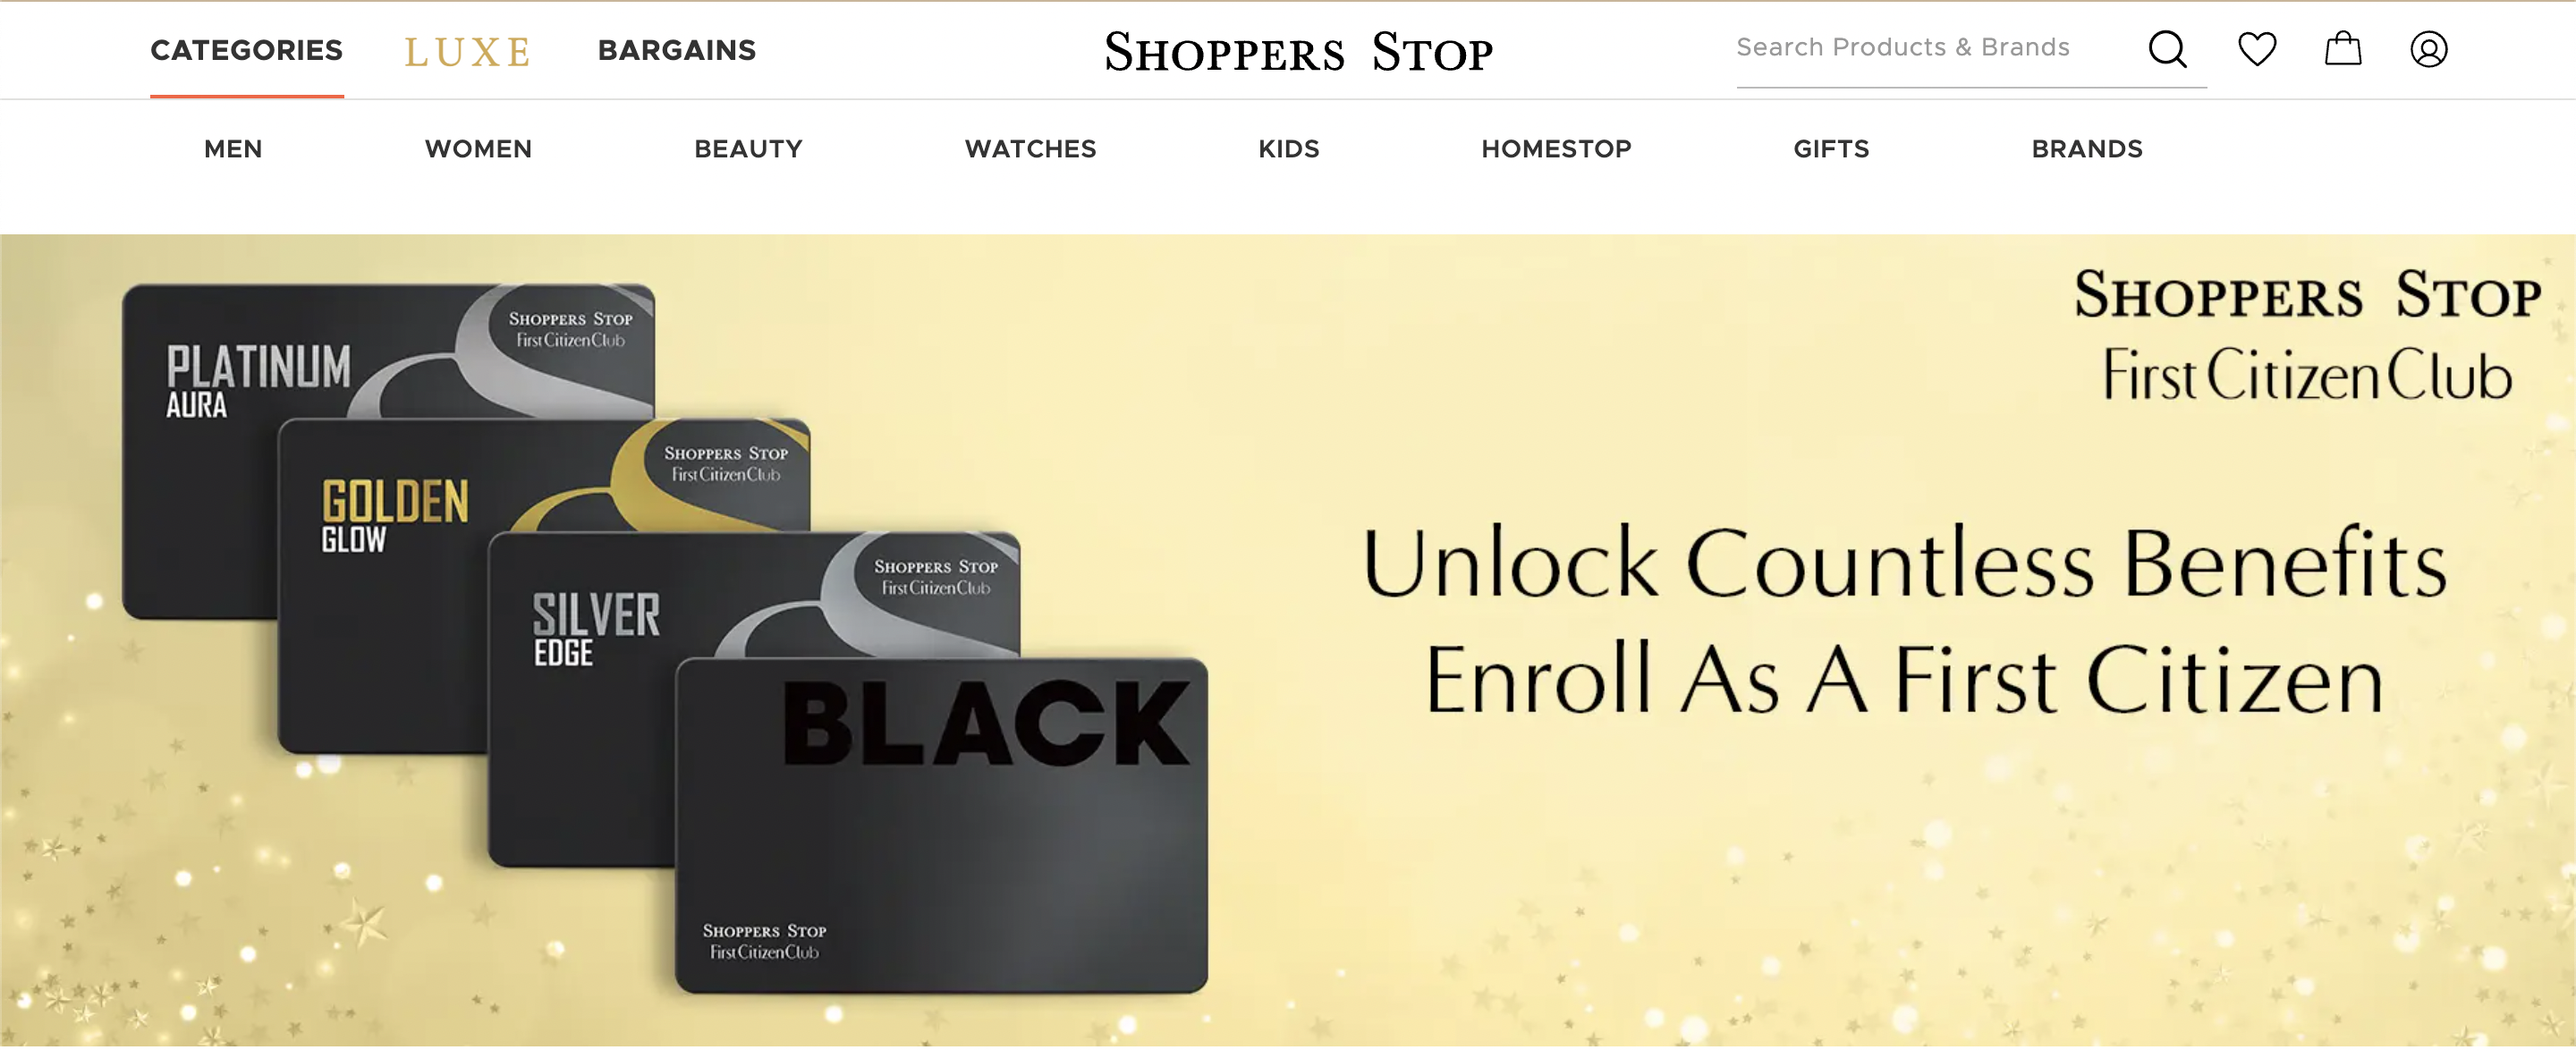 screen grab of First Citizen program from Shoppers Stop